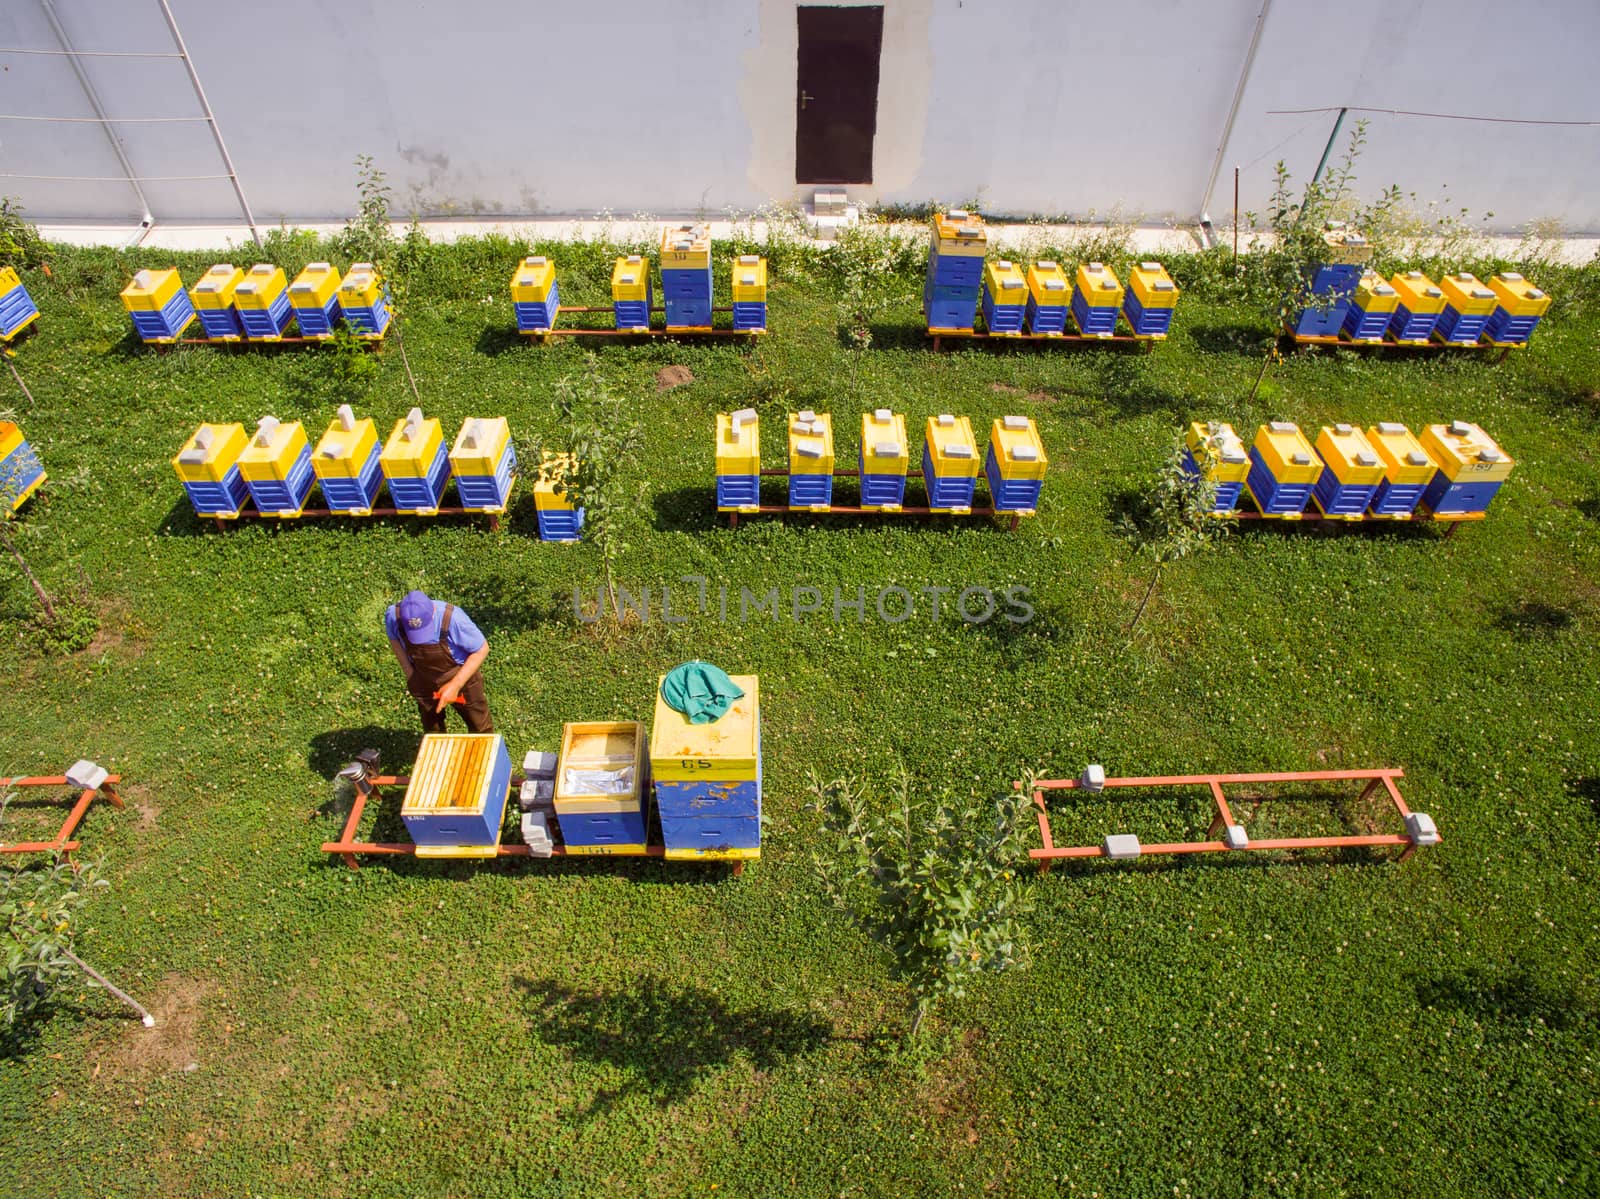 The beekeeper inspects the hives. Industrial beekeeping with honey bees.